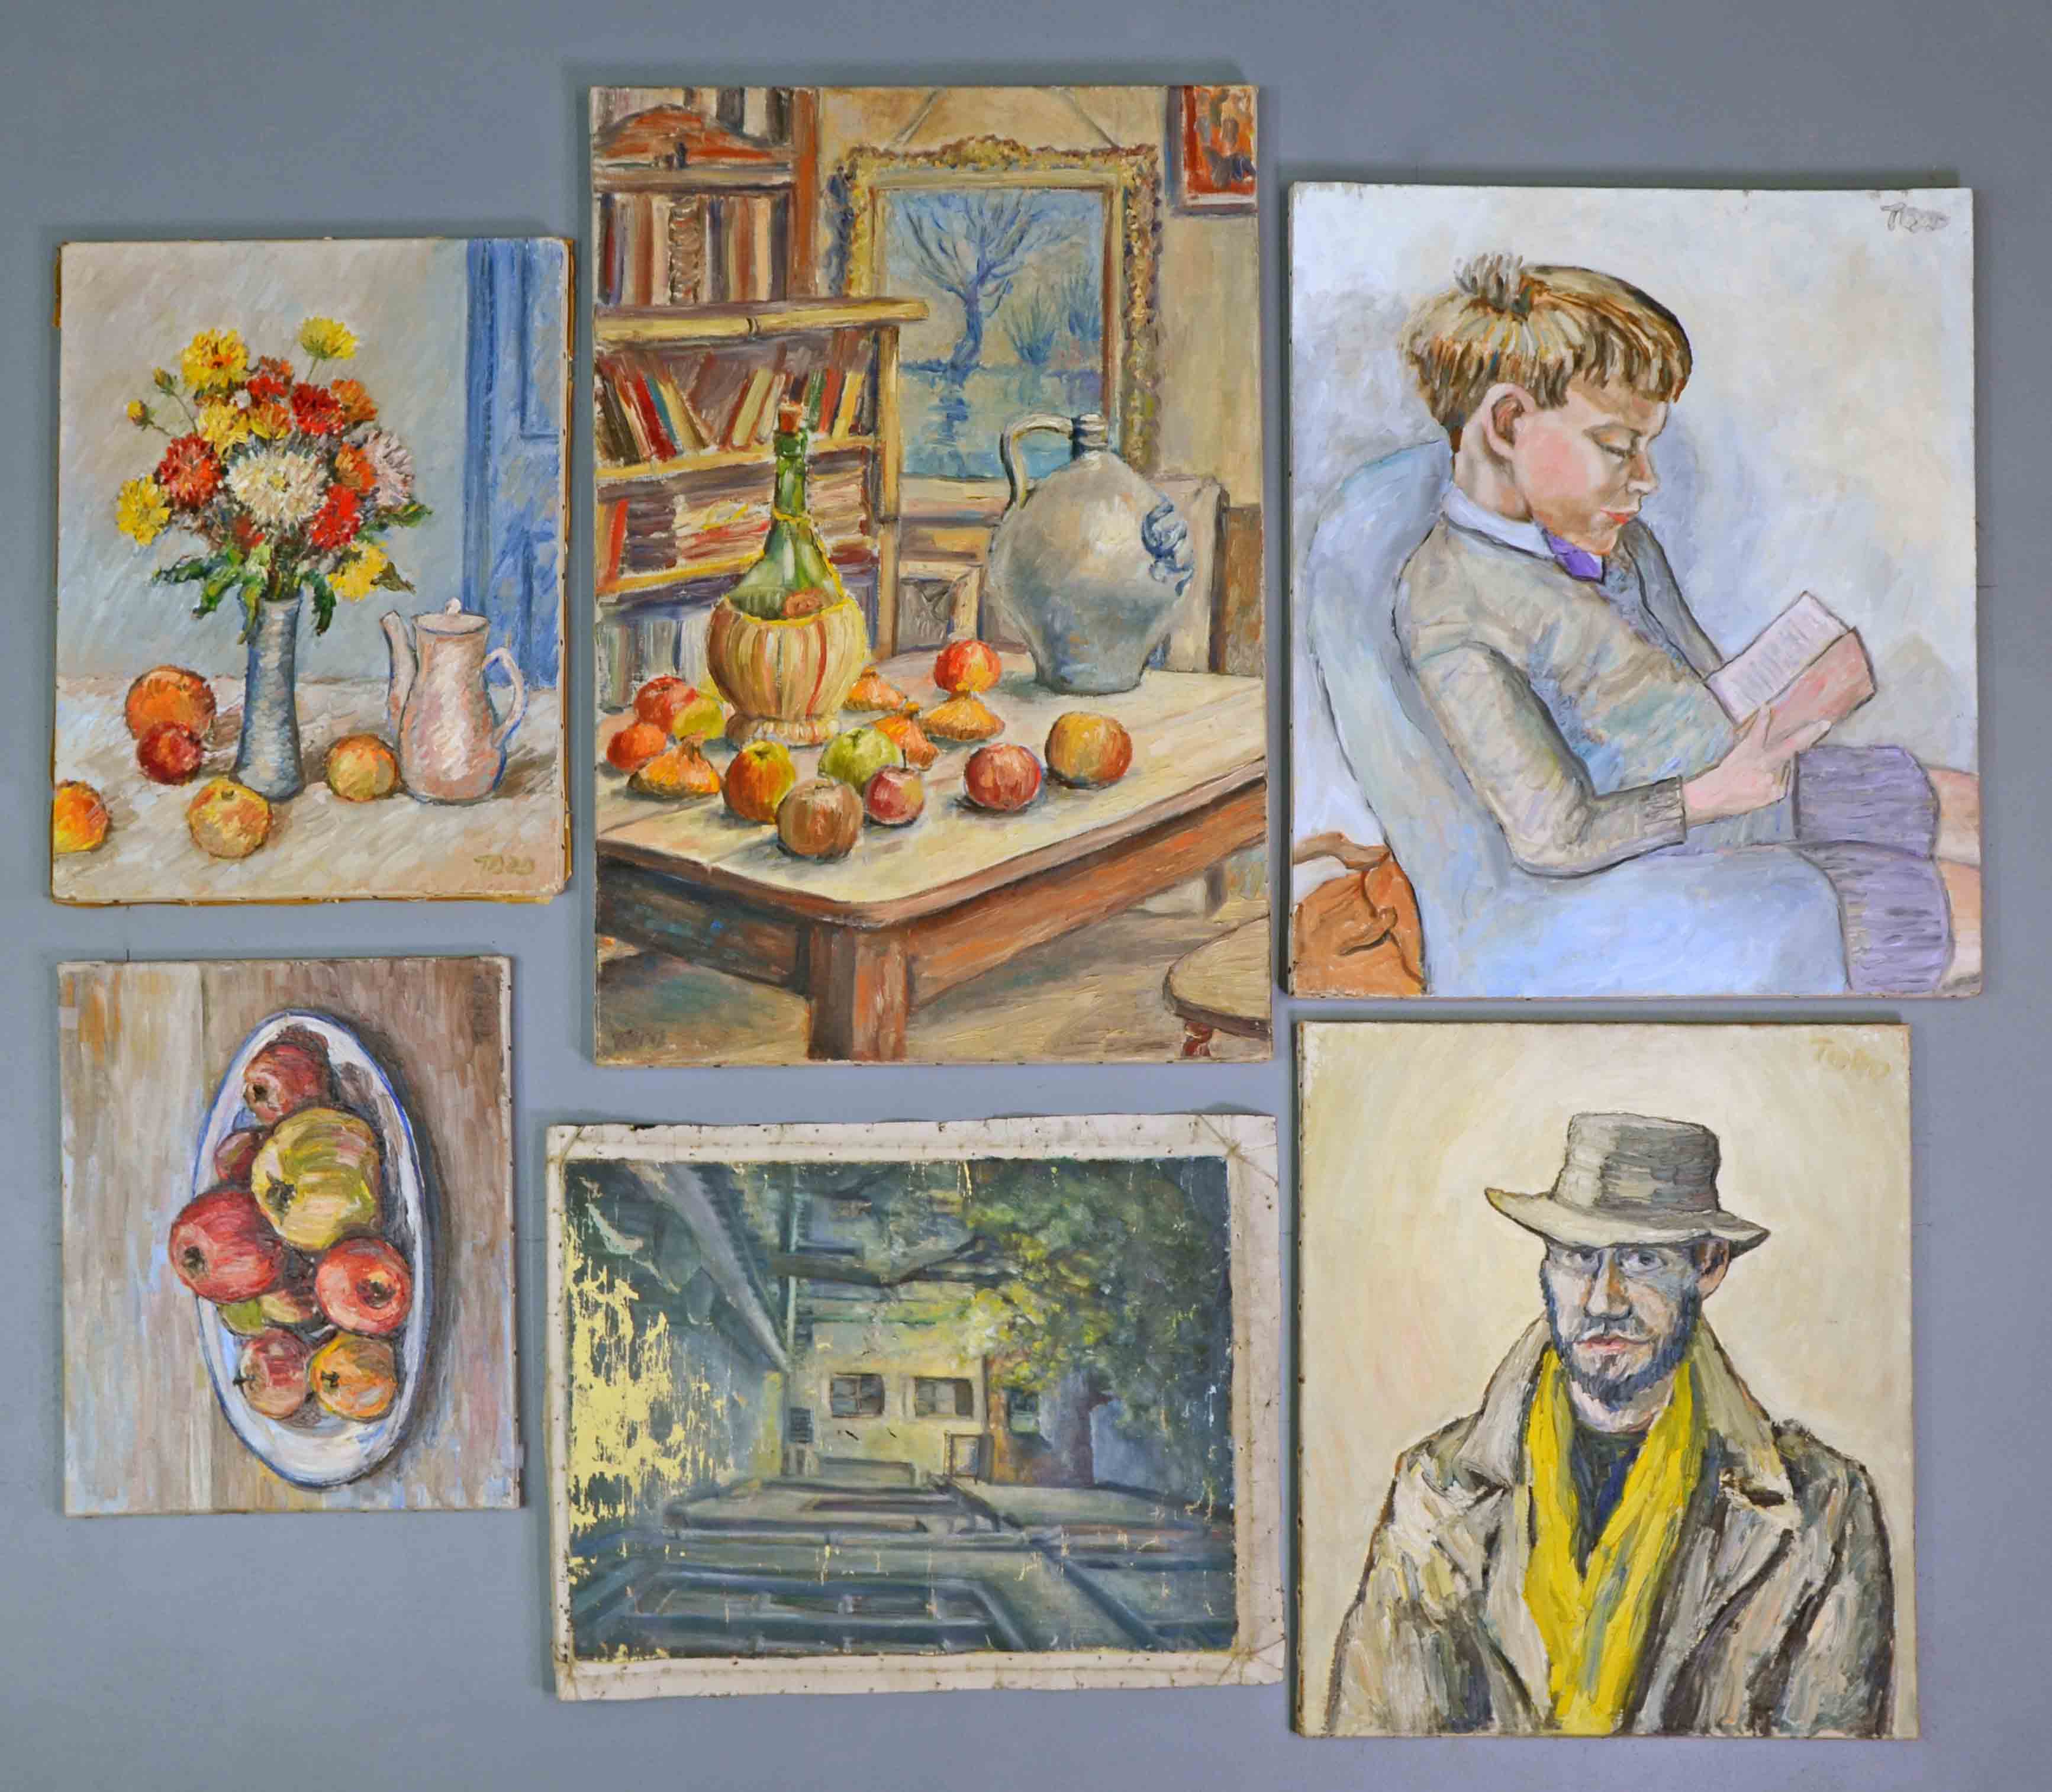 Todd's paintings